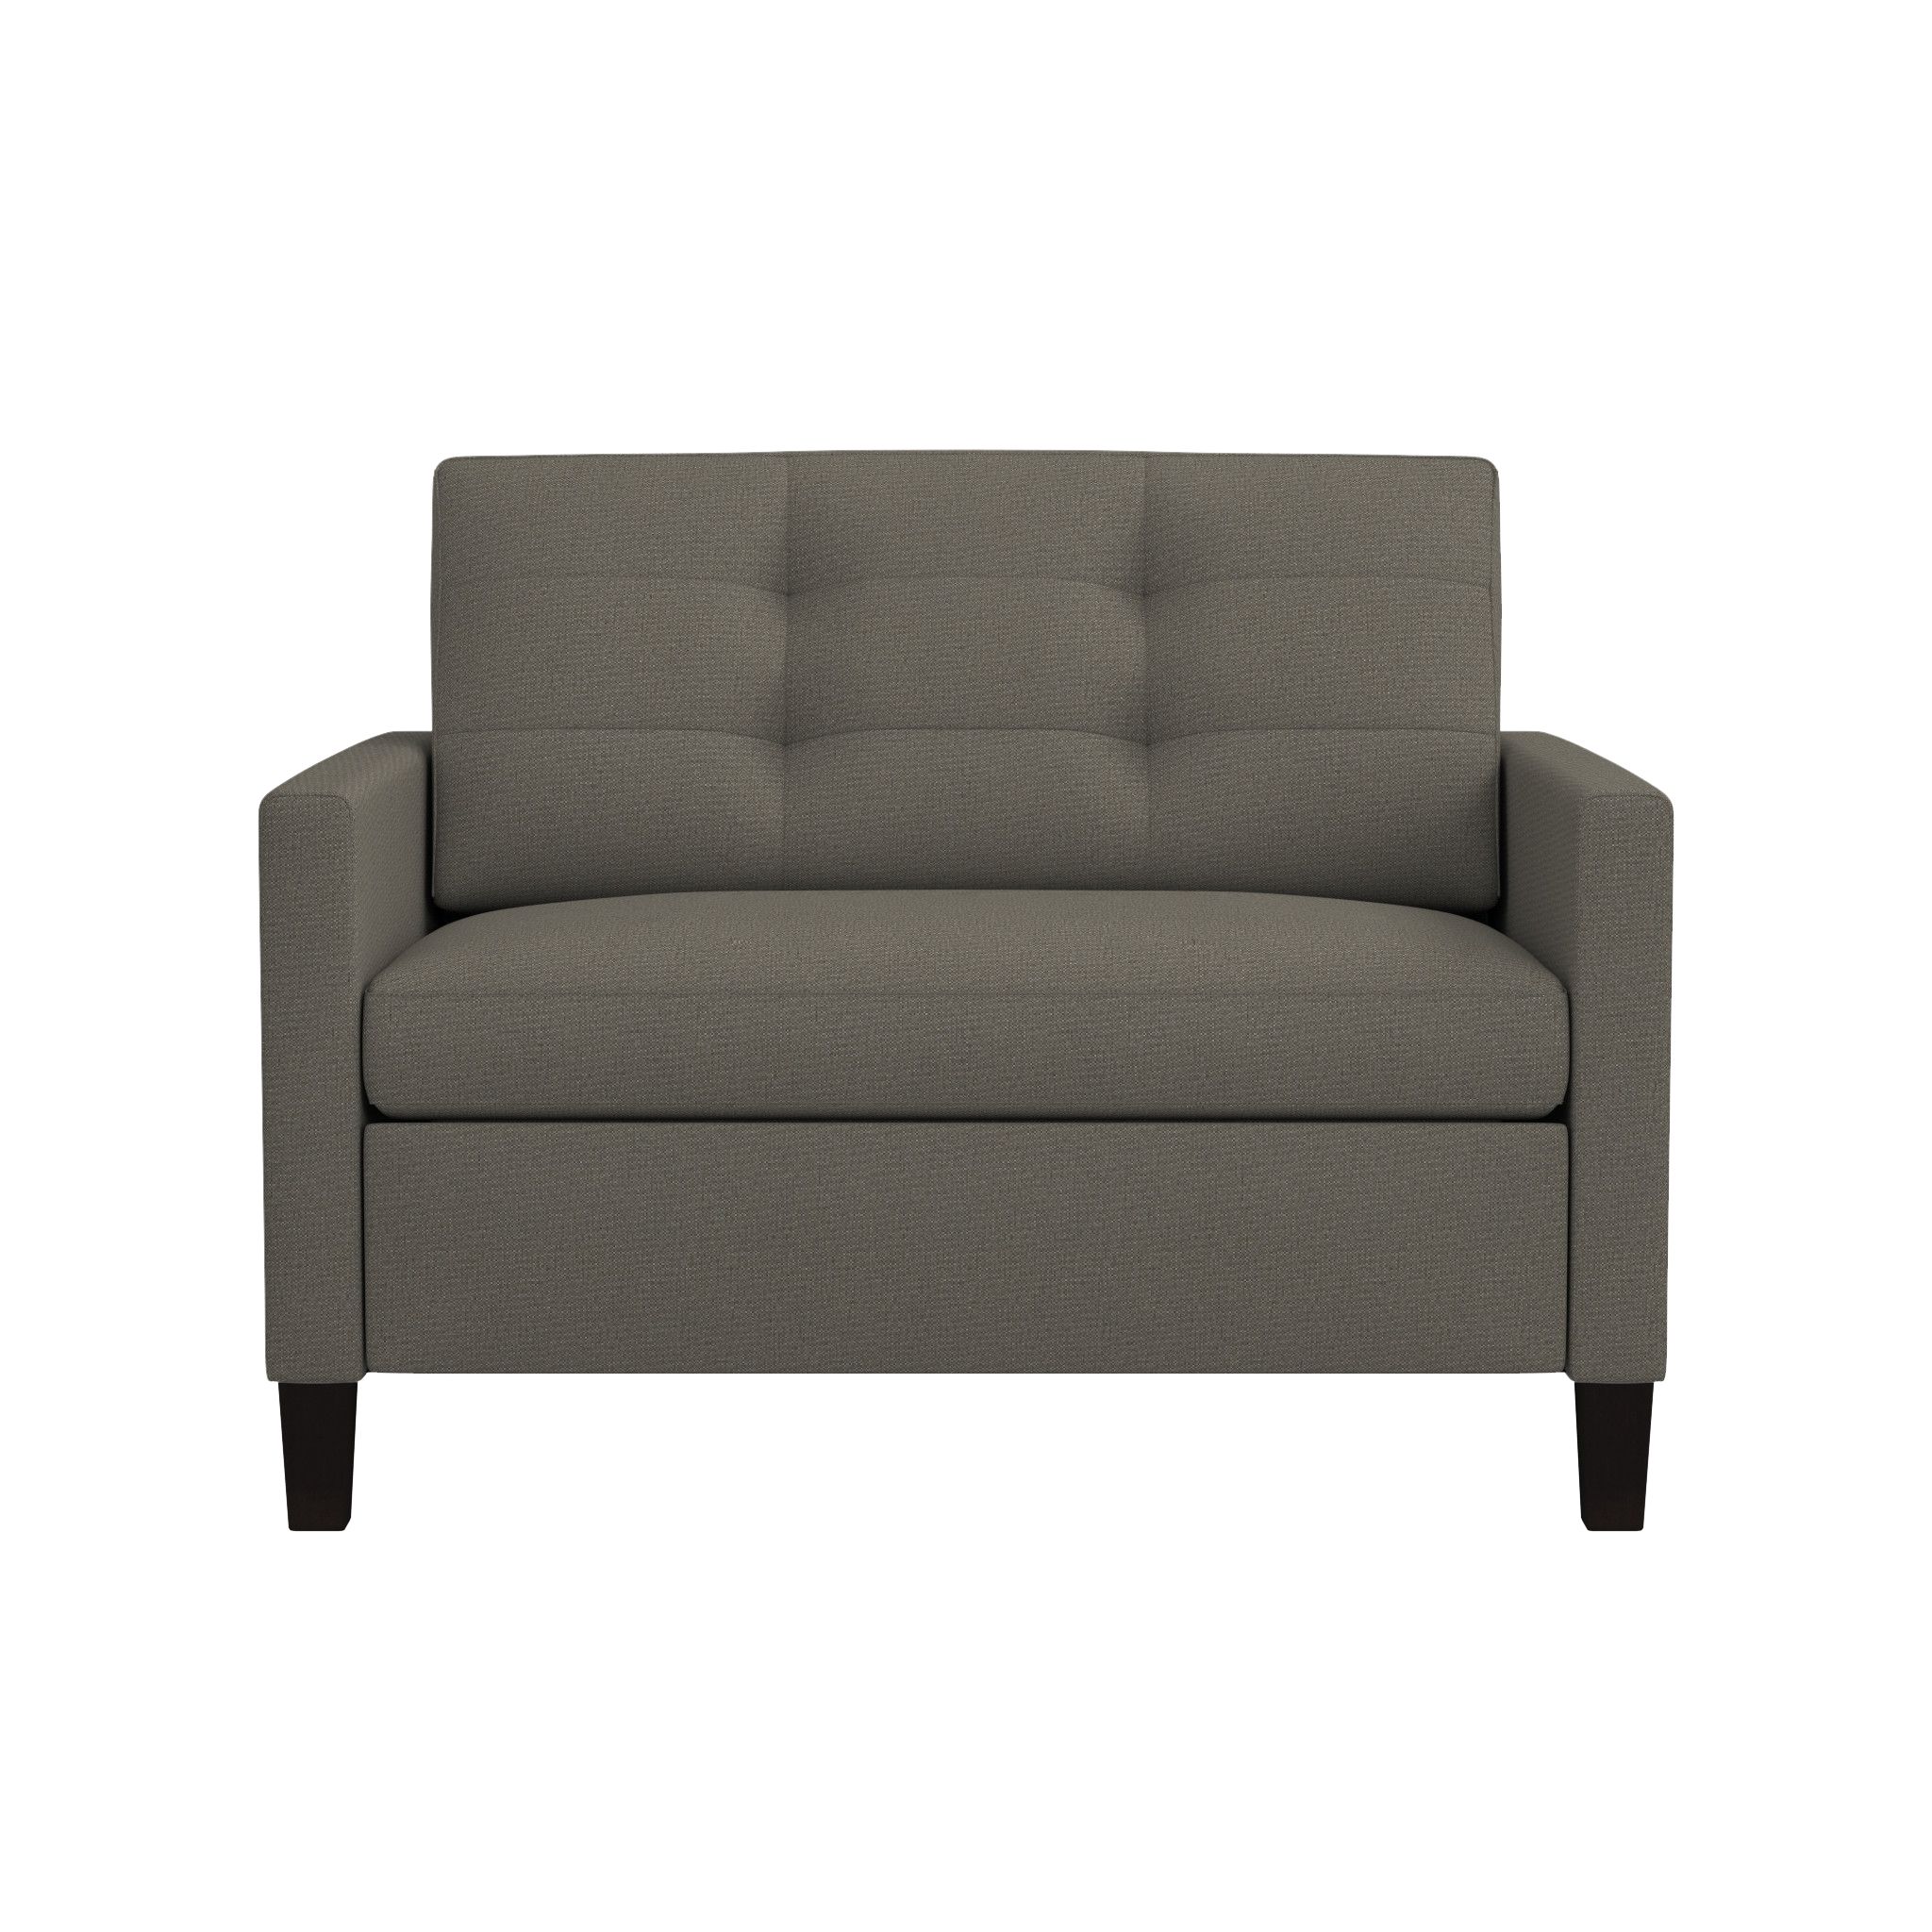 Karnes Twin Sleeper Sofa Chair | Crate And Barrel For Loveseat Twin Sleeper Sofas (View 29 of 30)